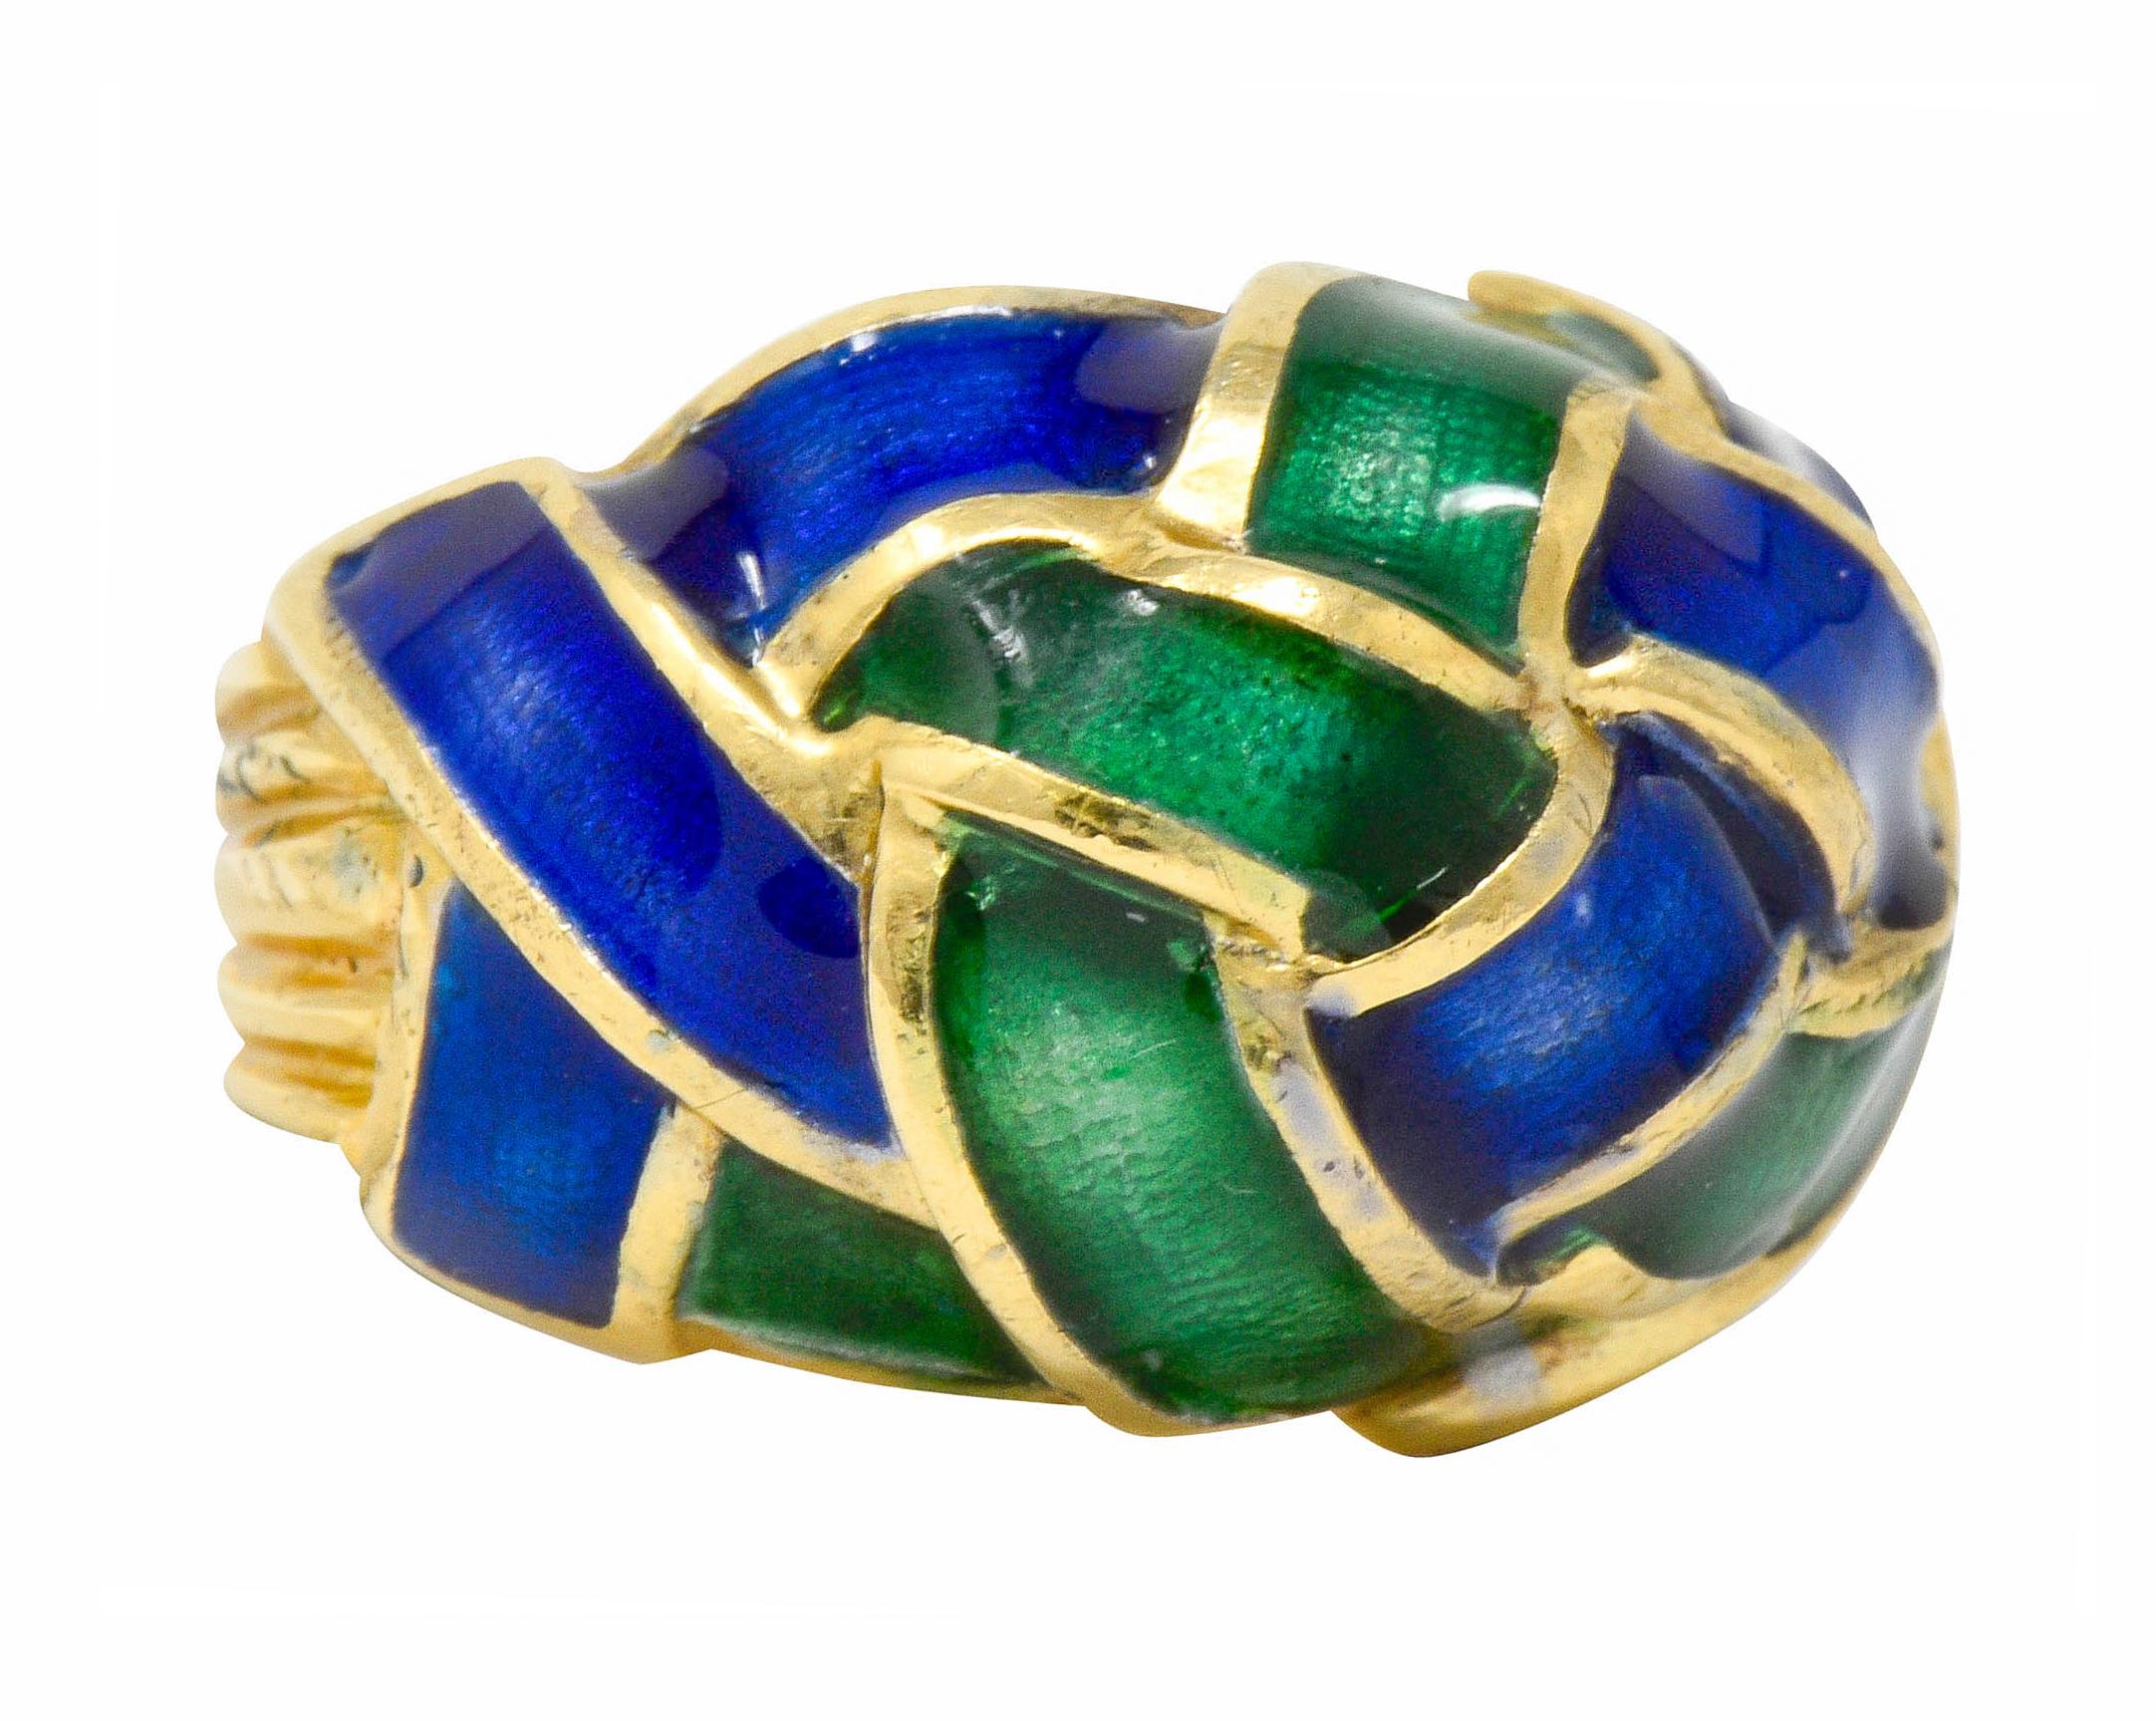 Bombé style ring designed as overlapping segments in a woven knot motif

Glossed with bright blue and green enamel, exhibiting no loss

Completed by a deeply grooved shank

Signed Tiffany Schlumberger

Tested as 18 karat gold

Circa: 1970s

Ring